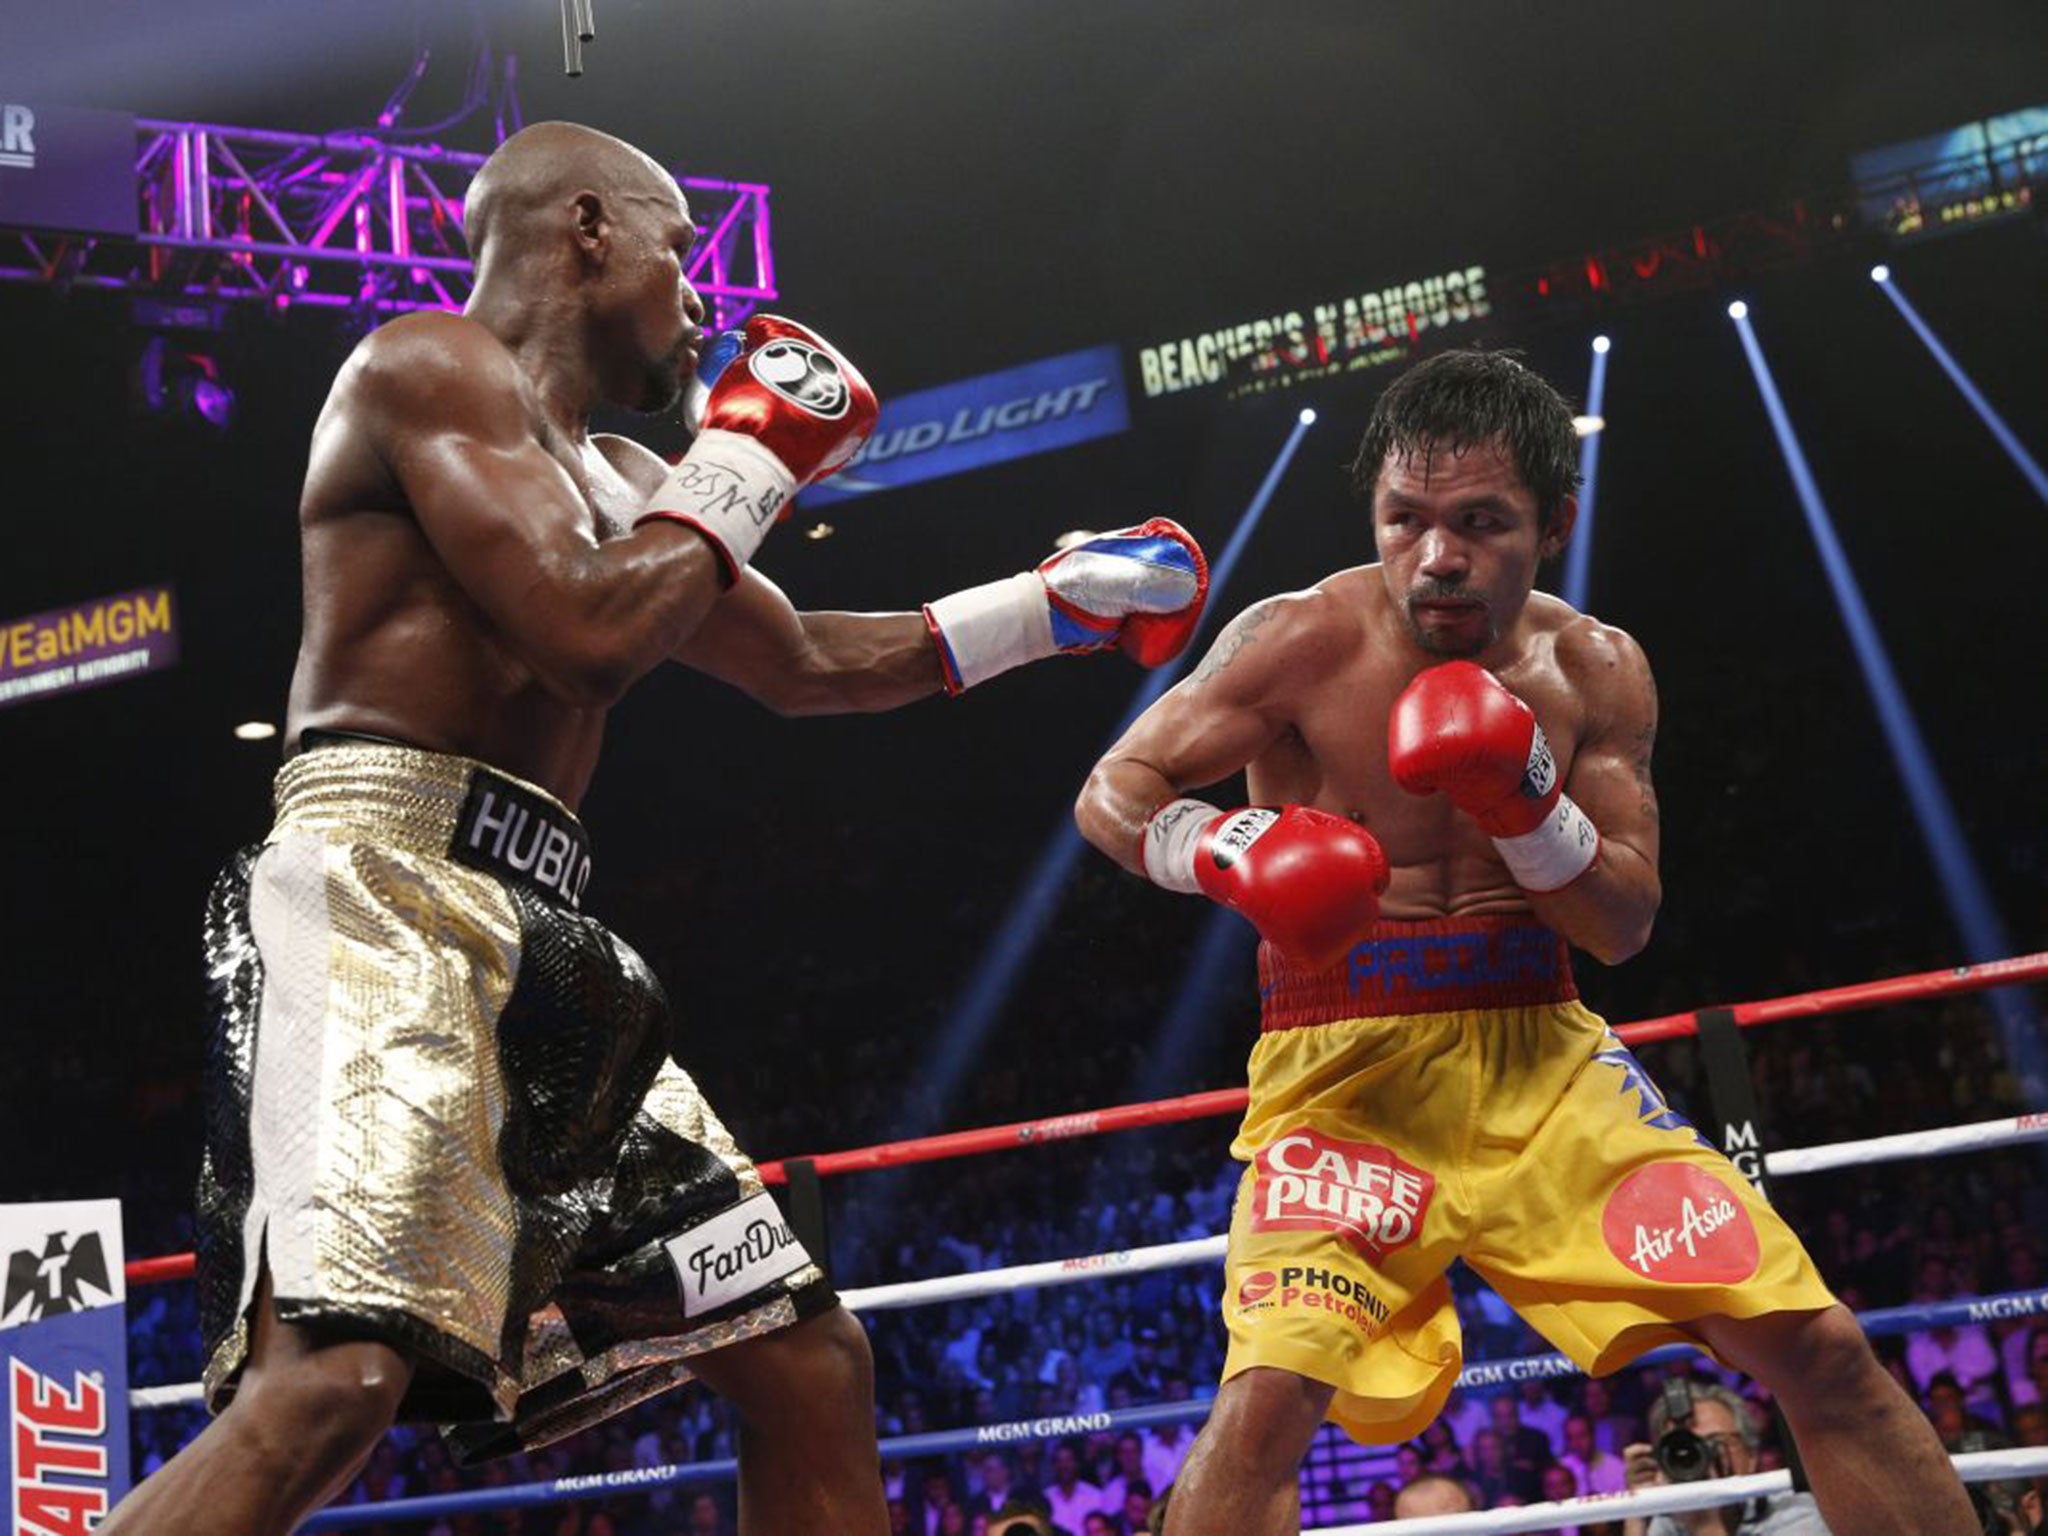 Floyd Mayweather was paid in excess of £100m to fight his nemesis Manny Pacquiao in Las Vegas